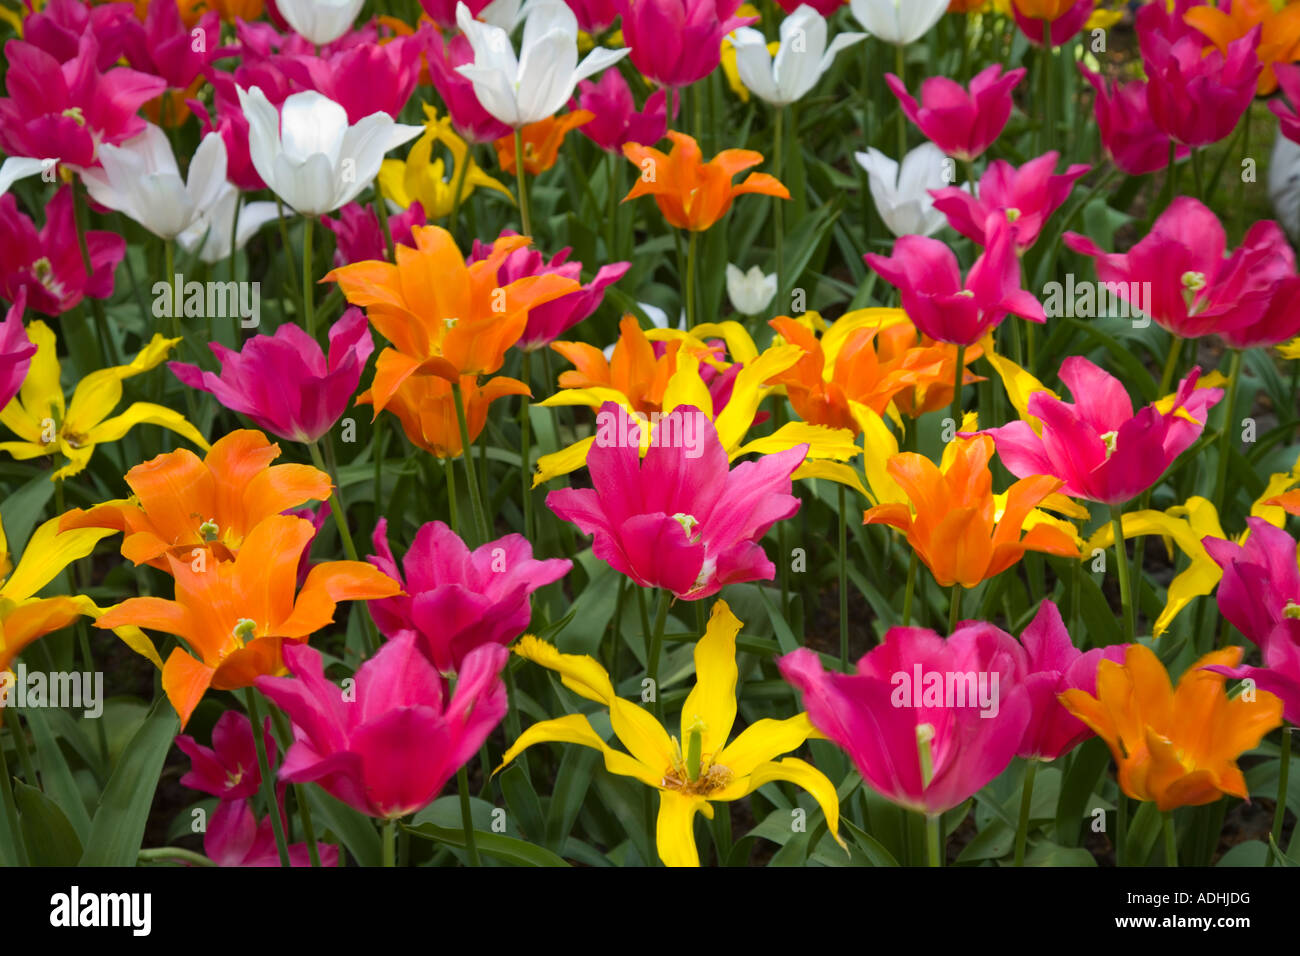 Spring Tulips and colorful Flowers in Keukenhof, Amsterdam, Holland Stock Photo